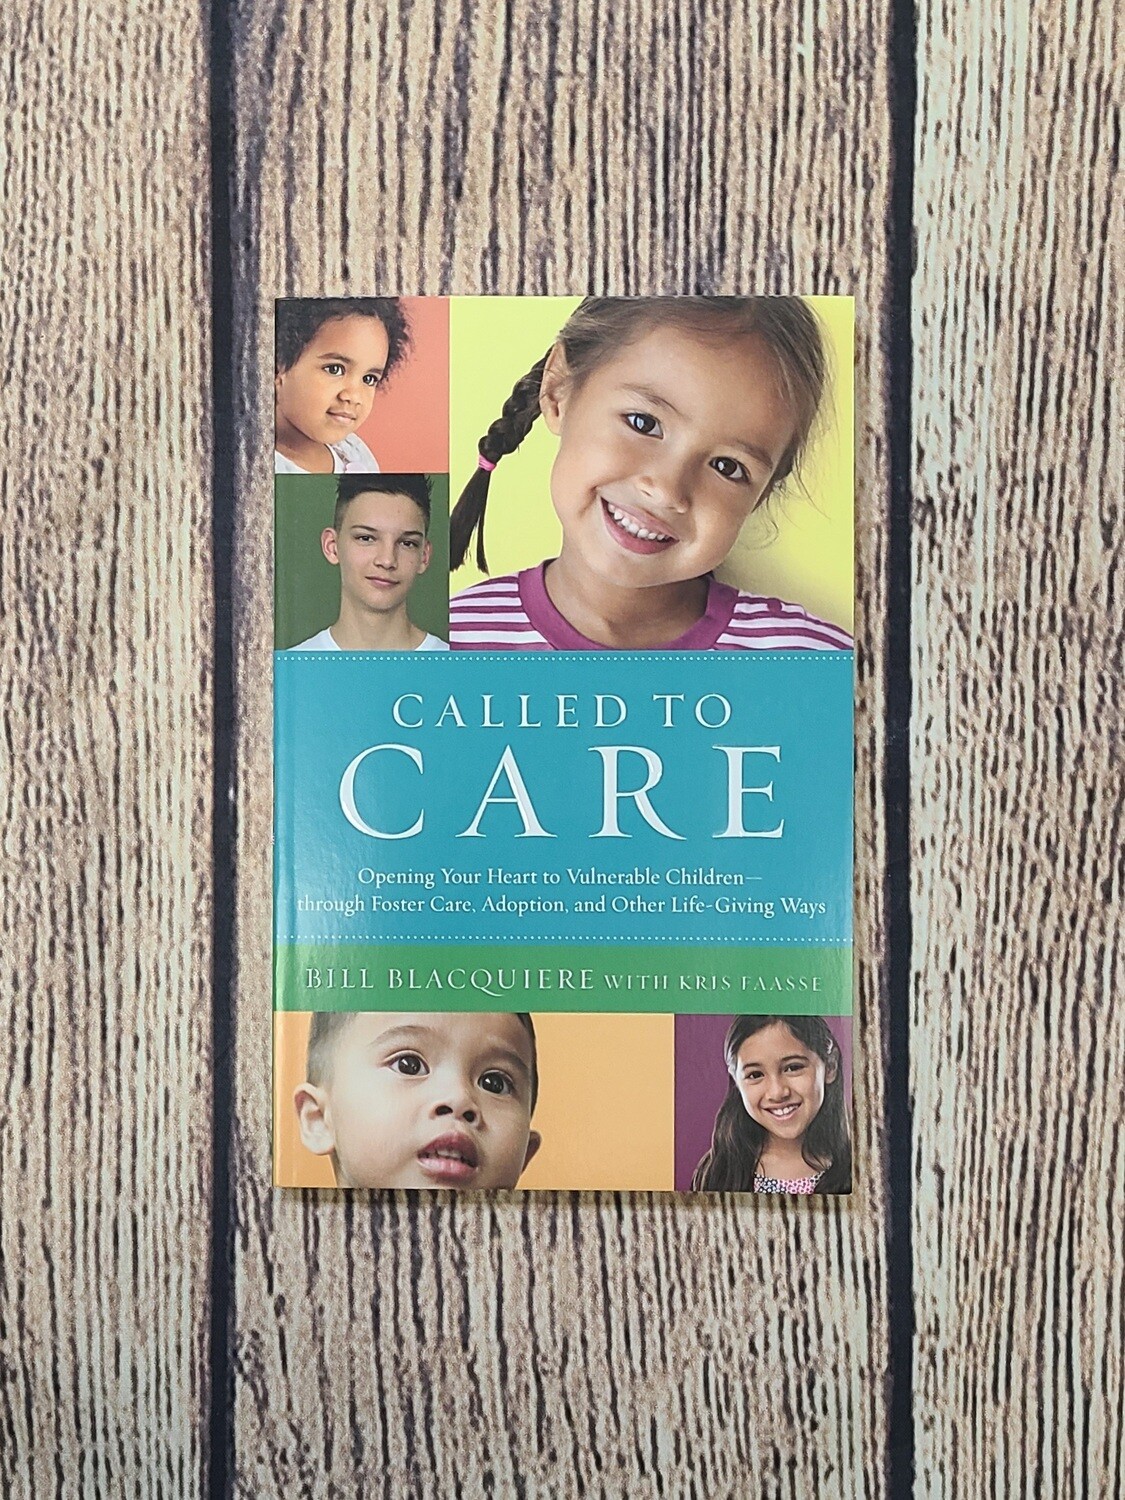 Called to Care: Opening Your Heart to Vulnerable Children through Foster Care, Adoption, and Other Life-Giving Ways by Bill Blacquiere with Kris Faasse